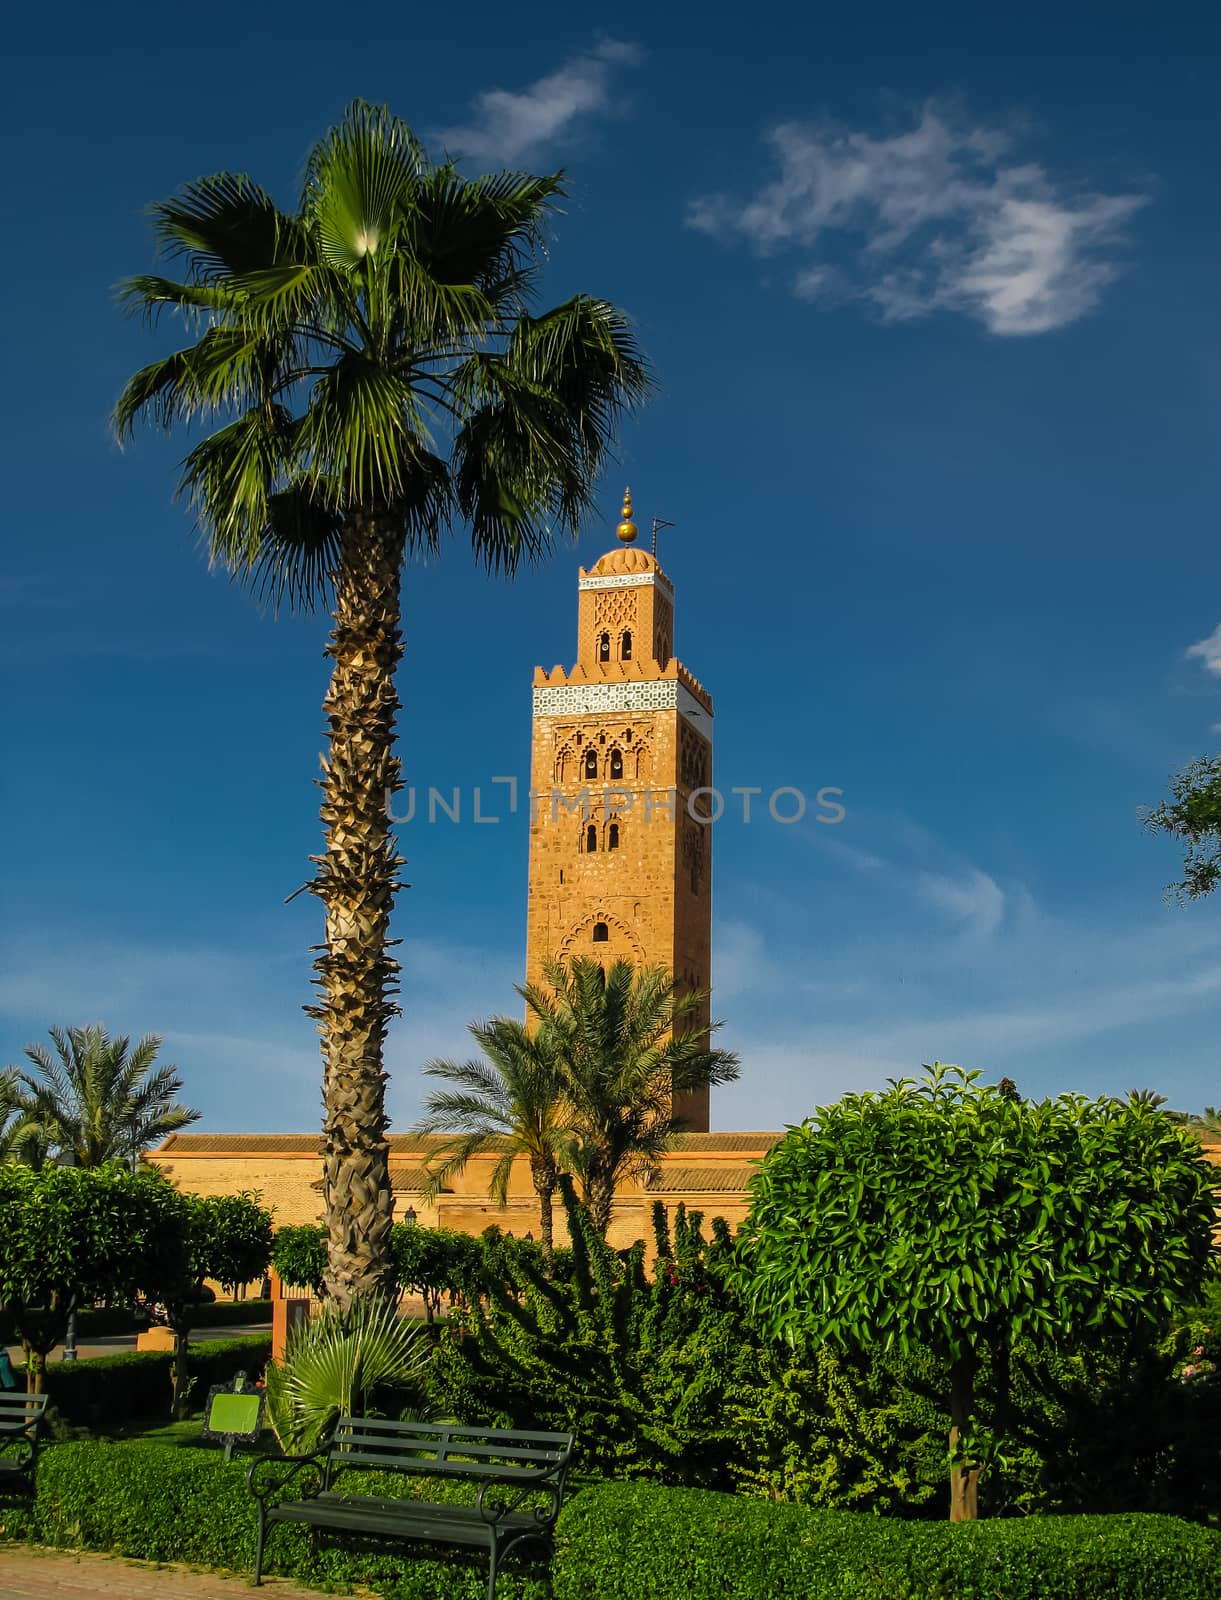 Exterior view to Koutoubia mosque aka Mosque of the Booksellers, Marrakesh, Morocco